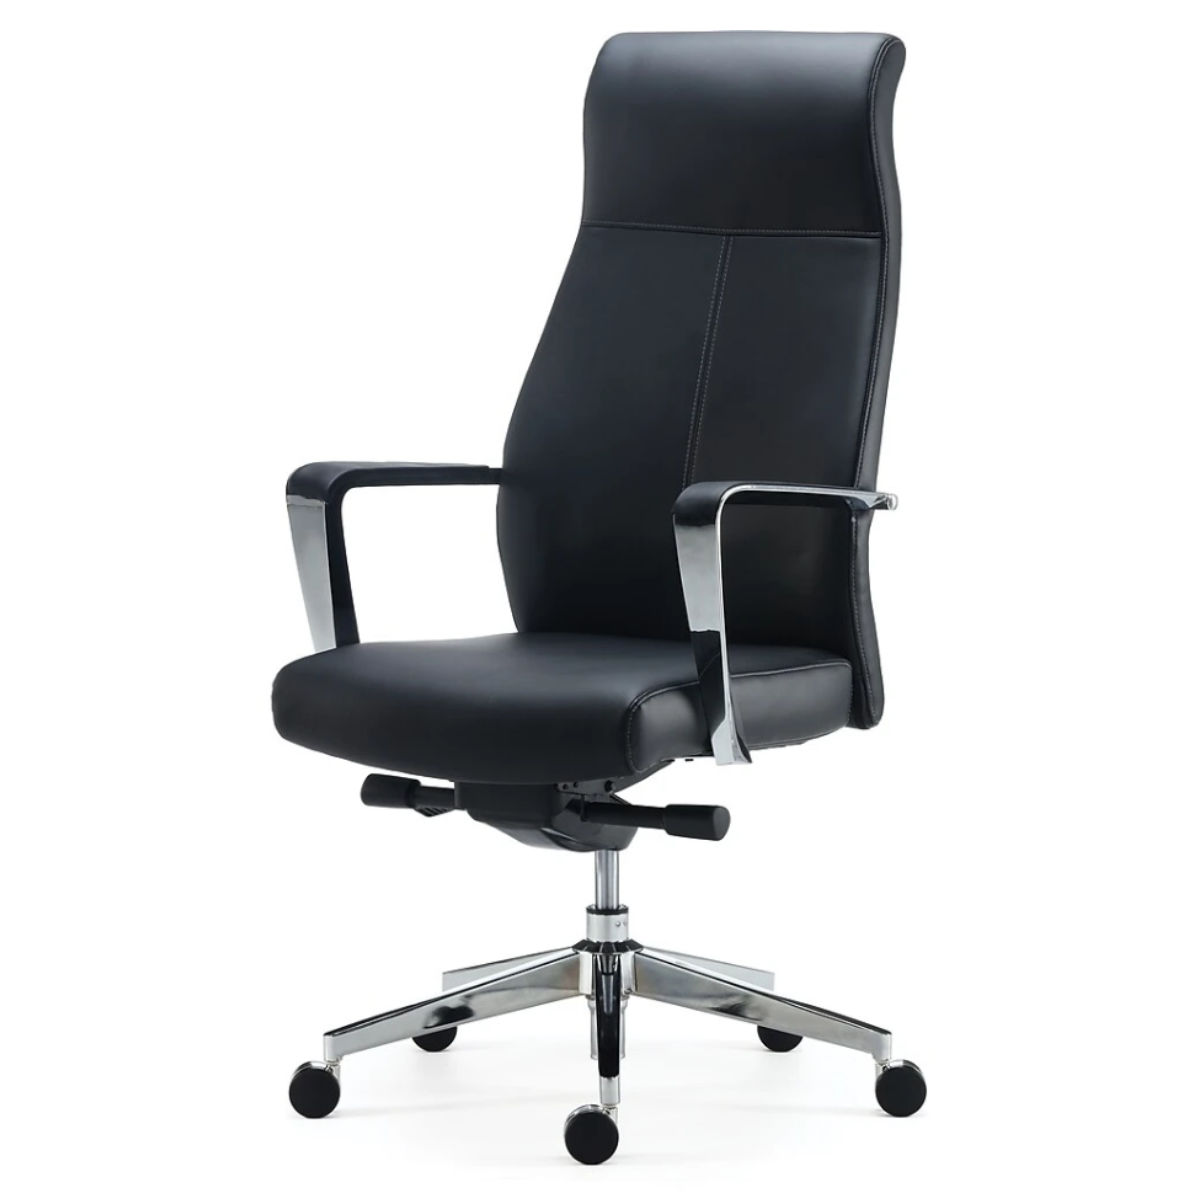 Staples Wincrest Bonded Leather Managers Chair